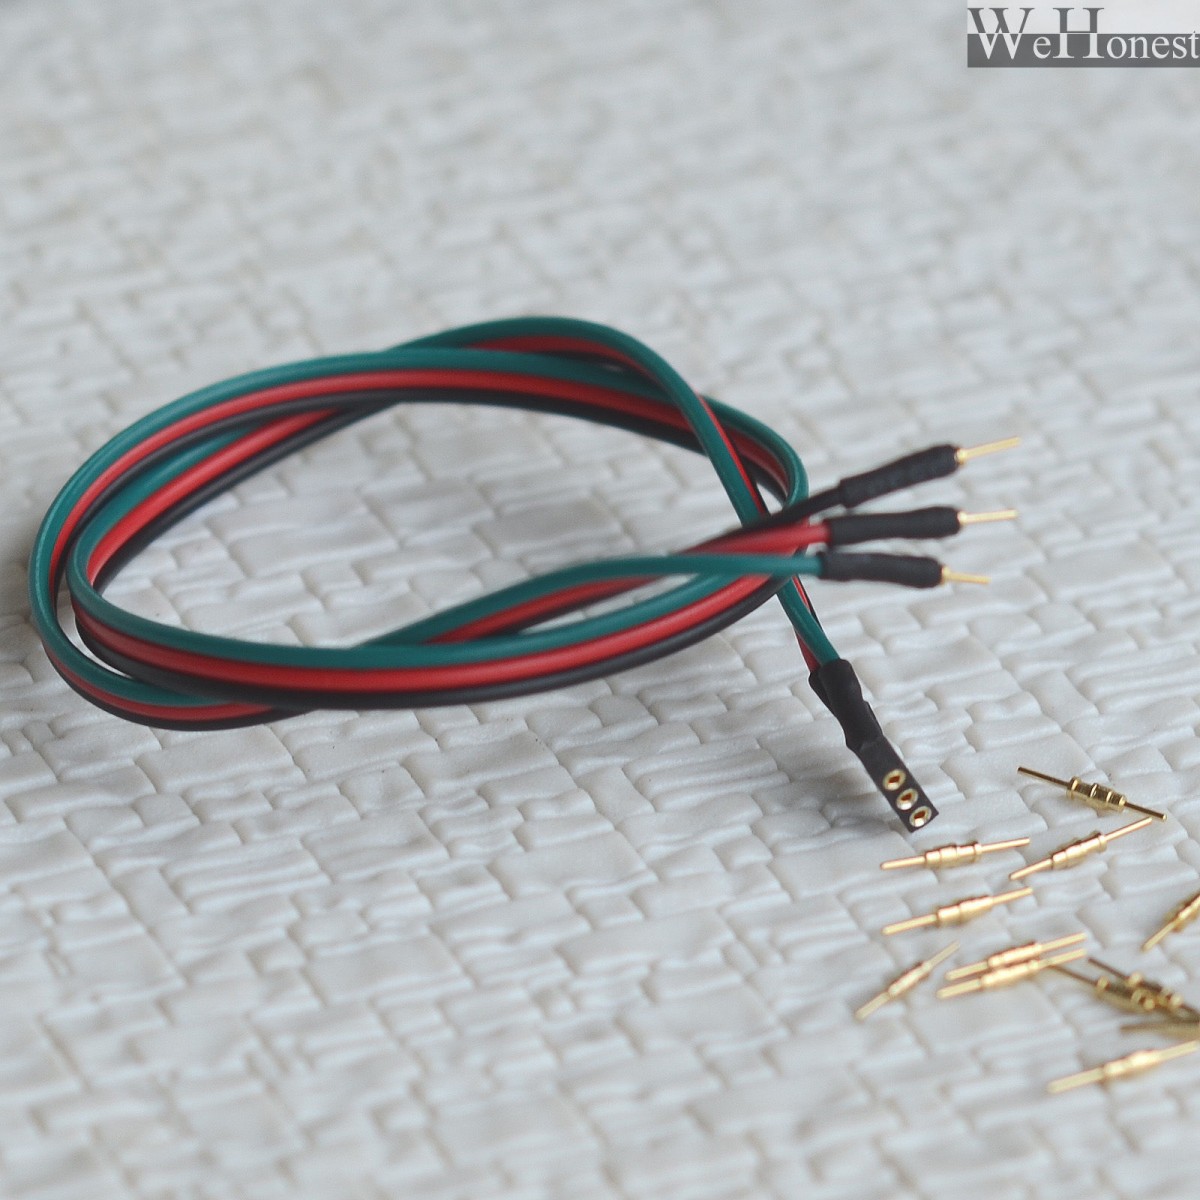 10 x extending wires with Connector for HO N Scale 2 aspects signals #3P